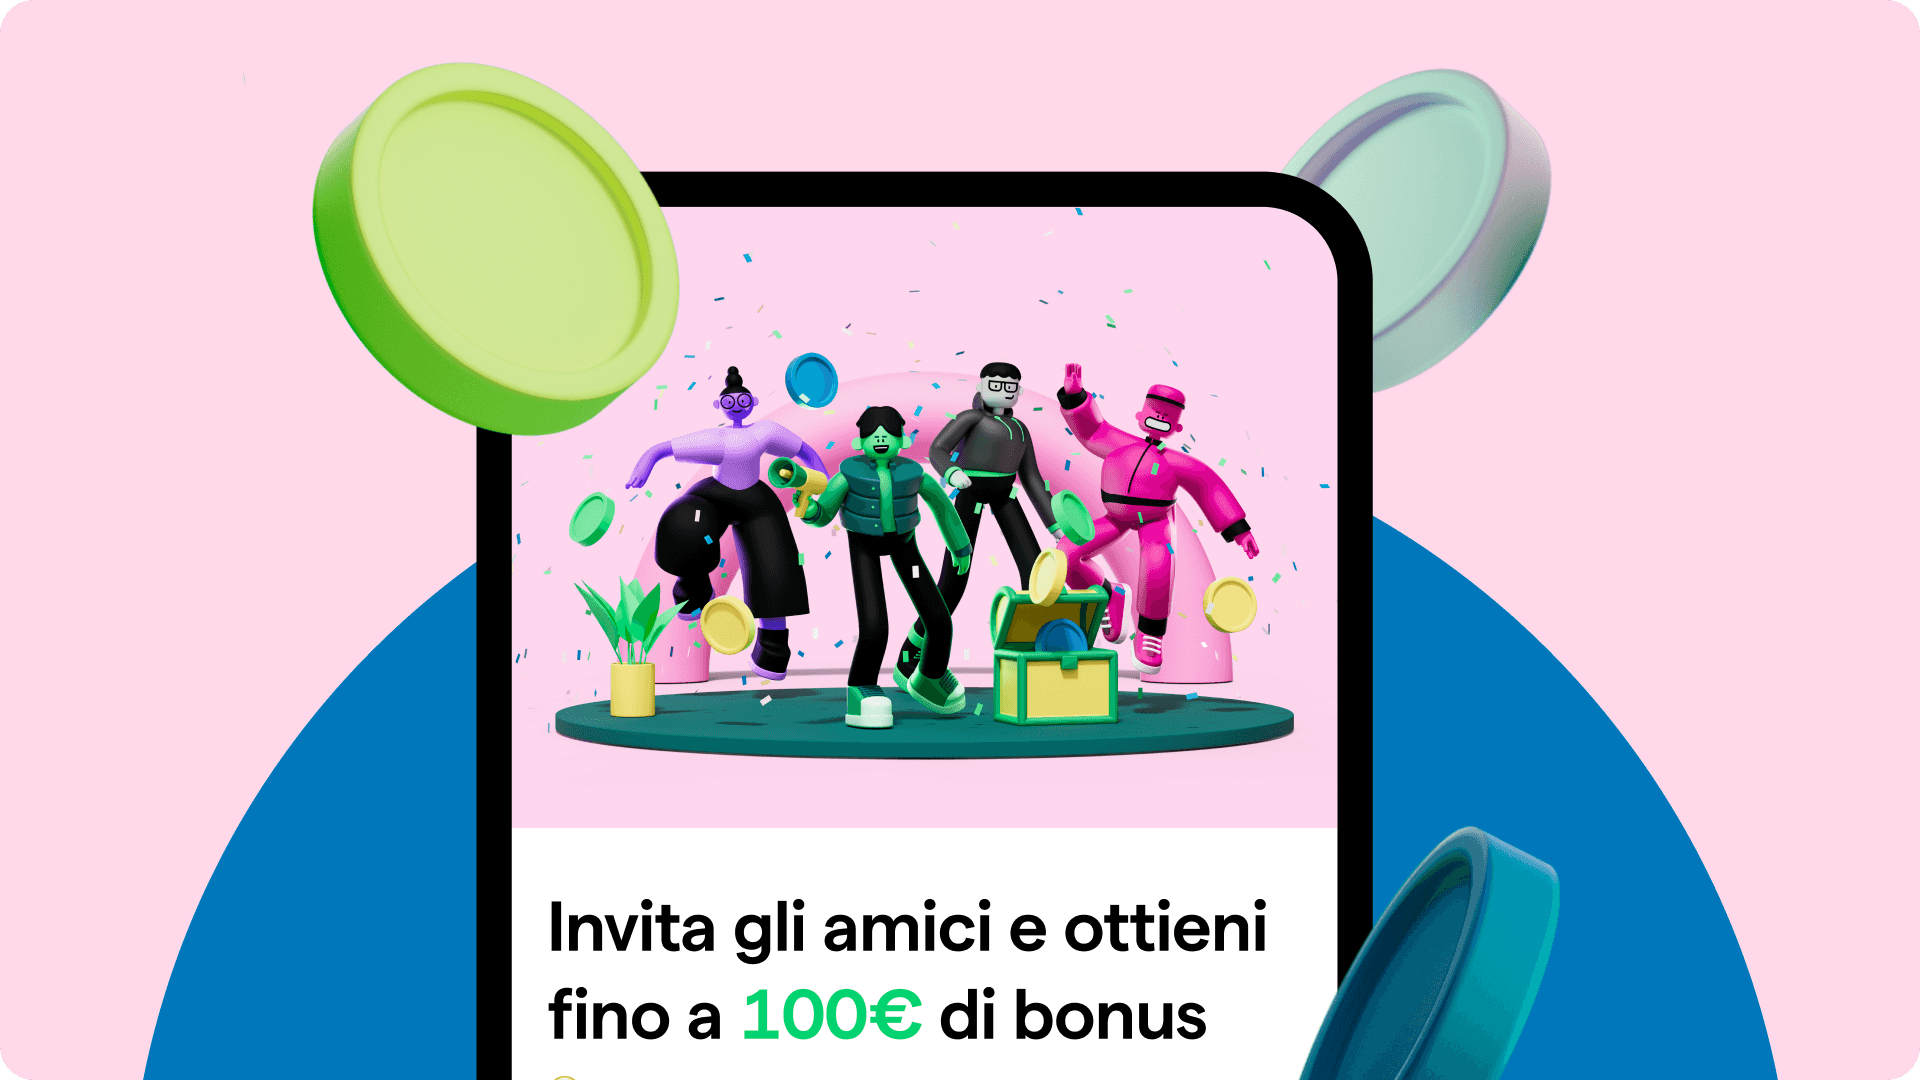 Invite a friend to Young Platform and get a bonus of up to 100 euros